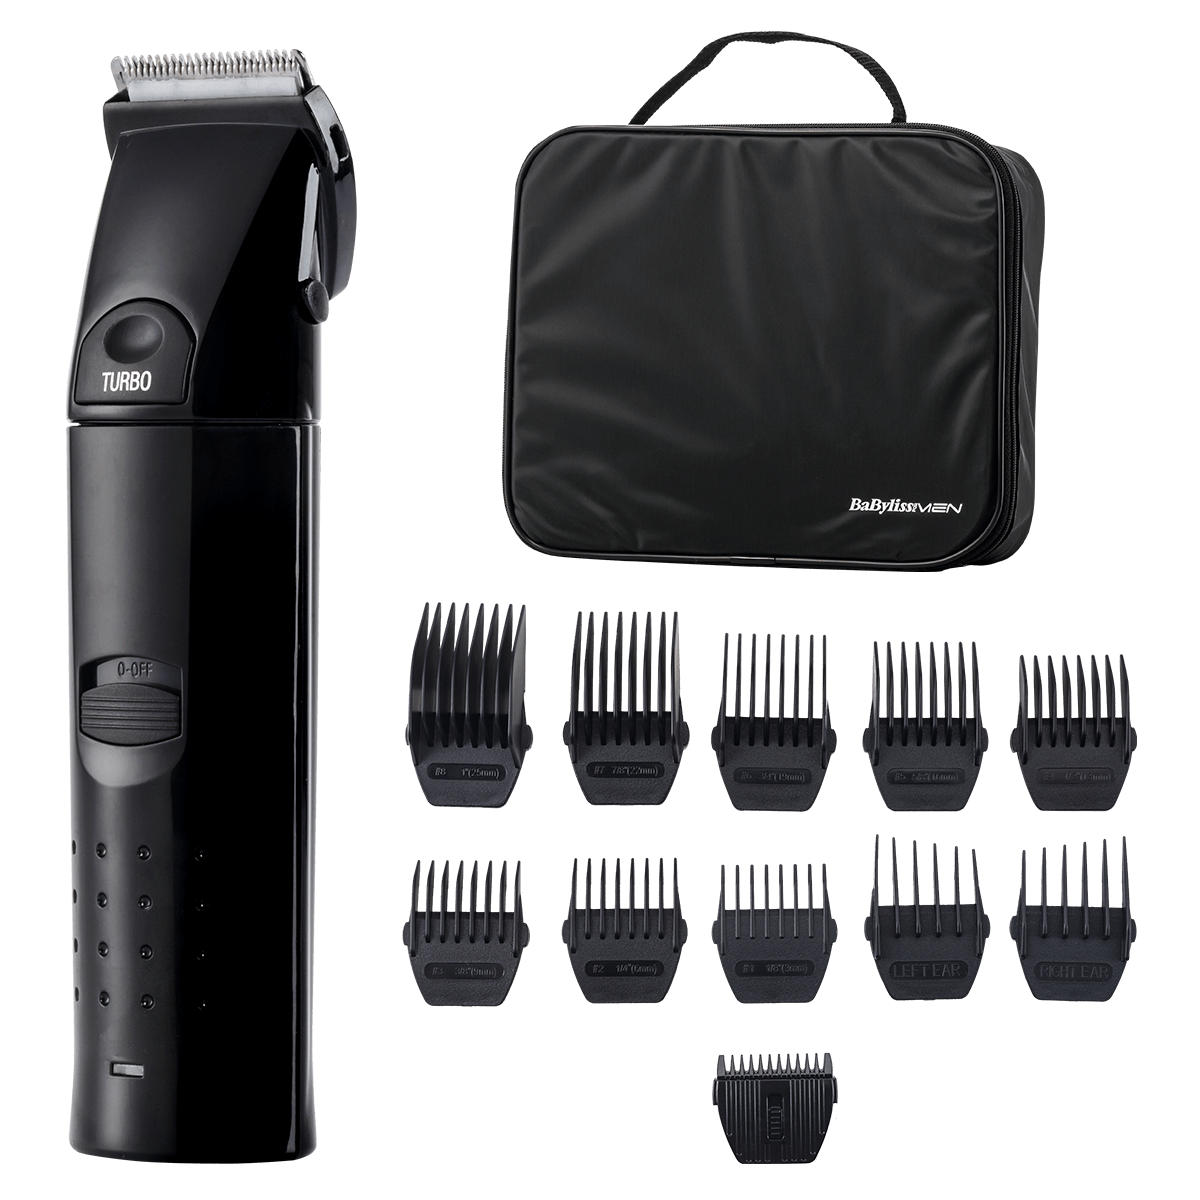 babyliss grooming trim 10 in 1